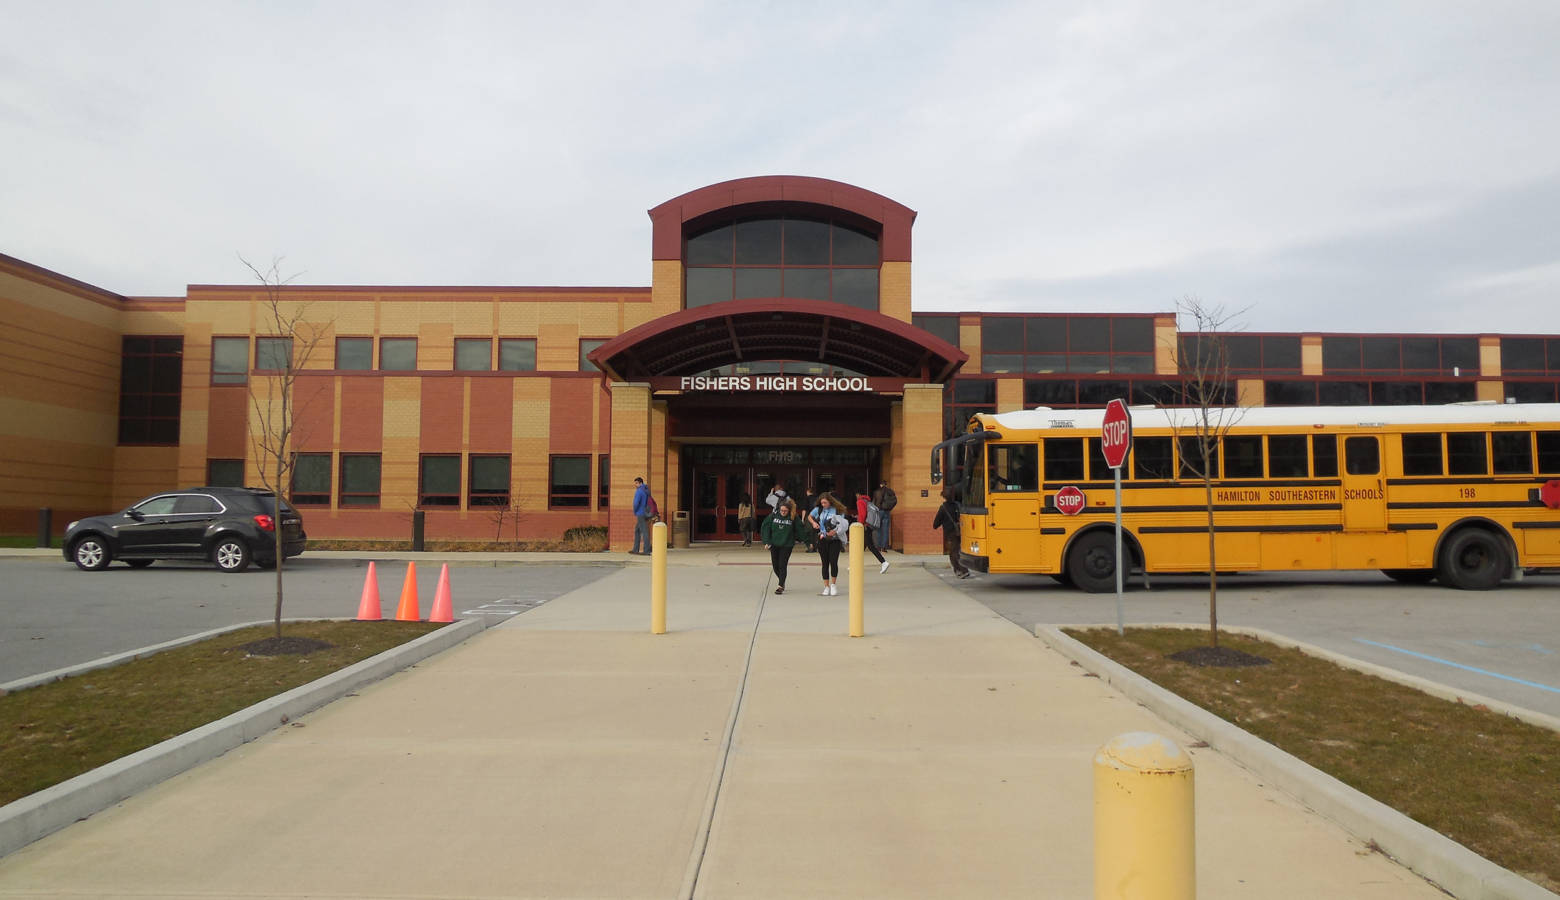 Students leave Fishers High School for the day. (Jill Sheridan/IPB News)